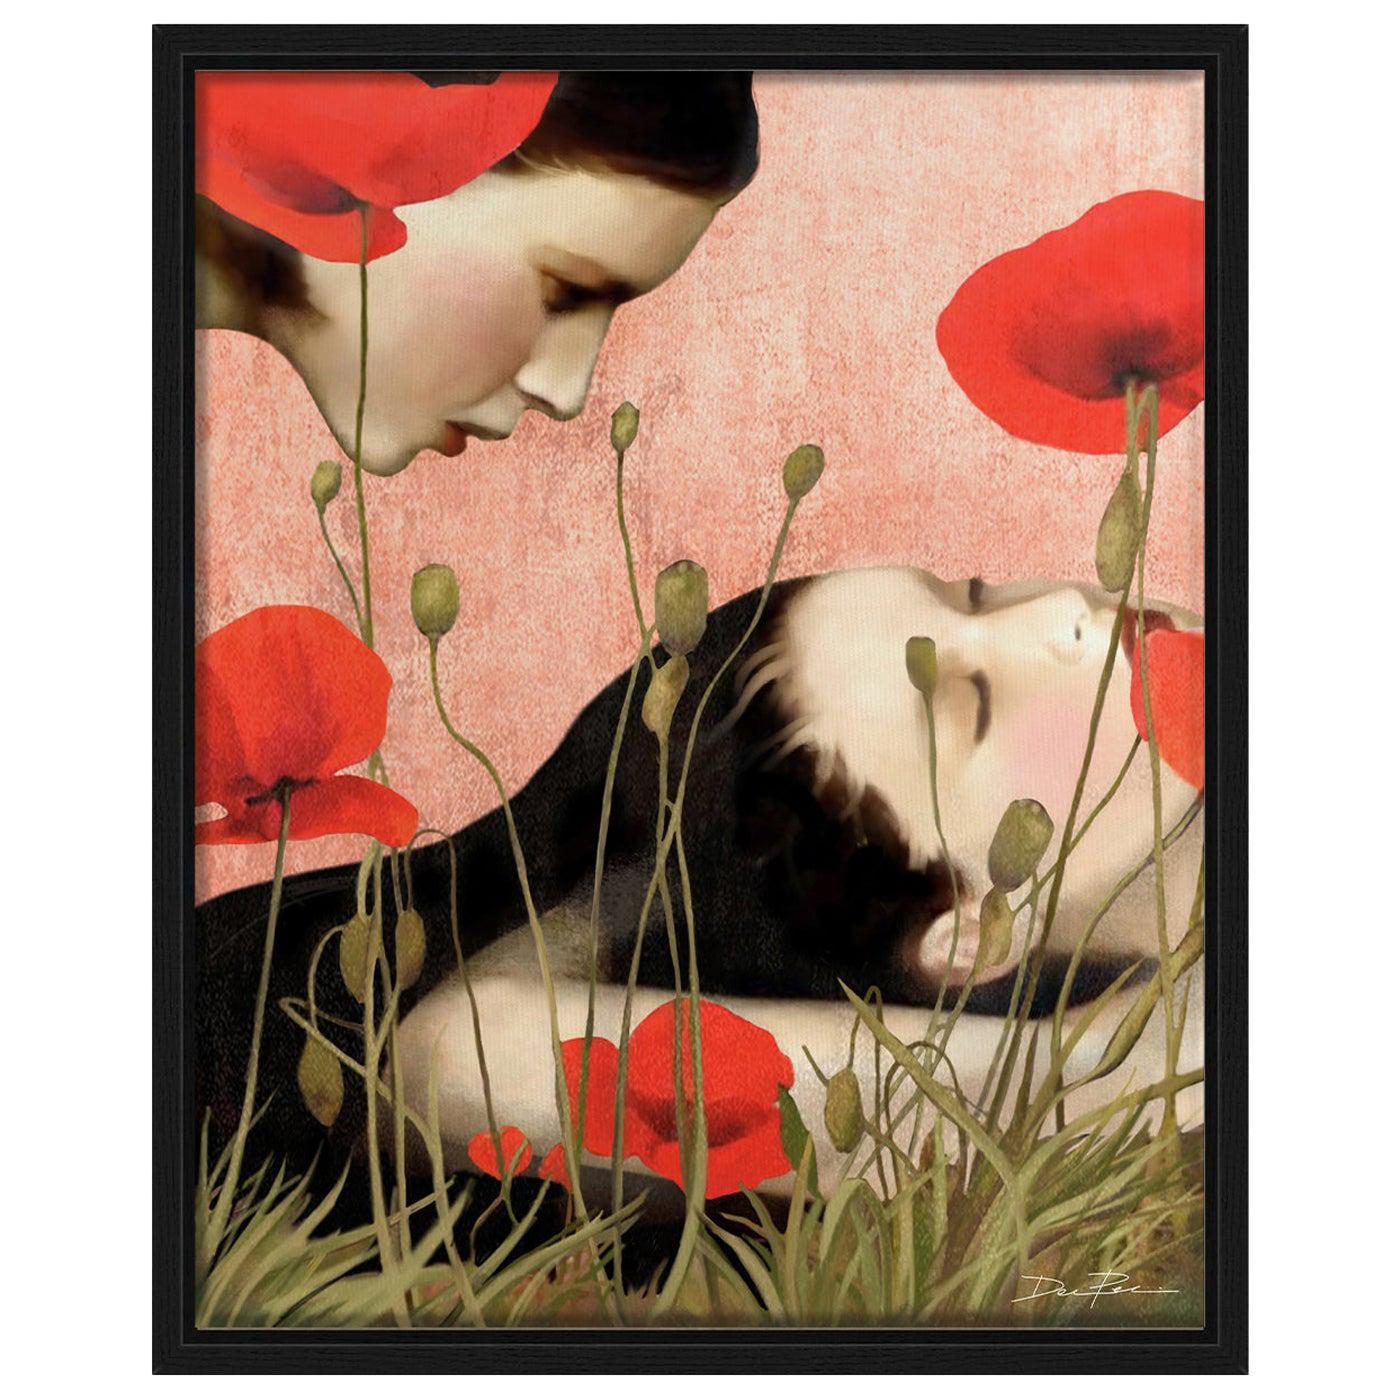 Dreaming in a Field of Poppies Digital Painting For Sale